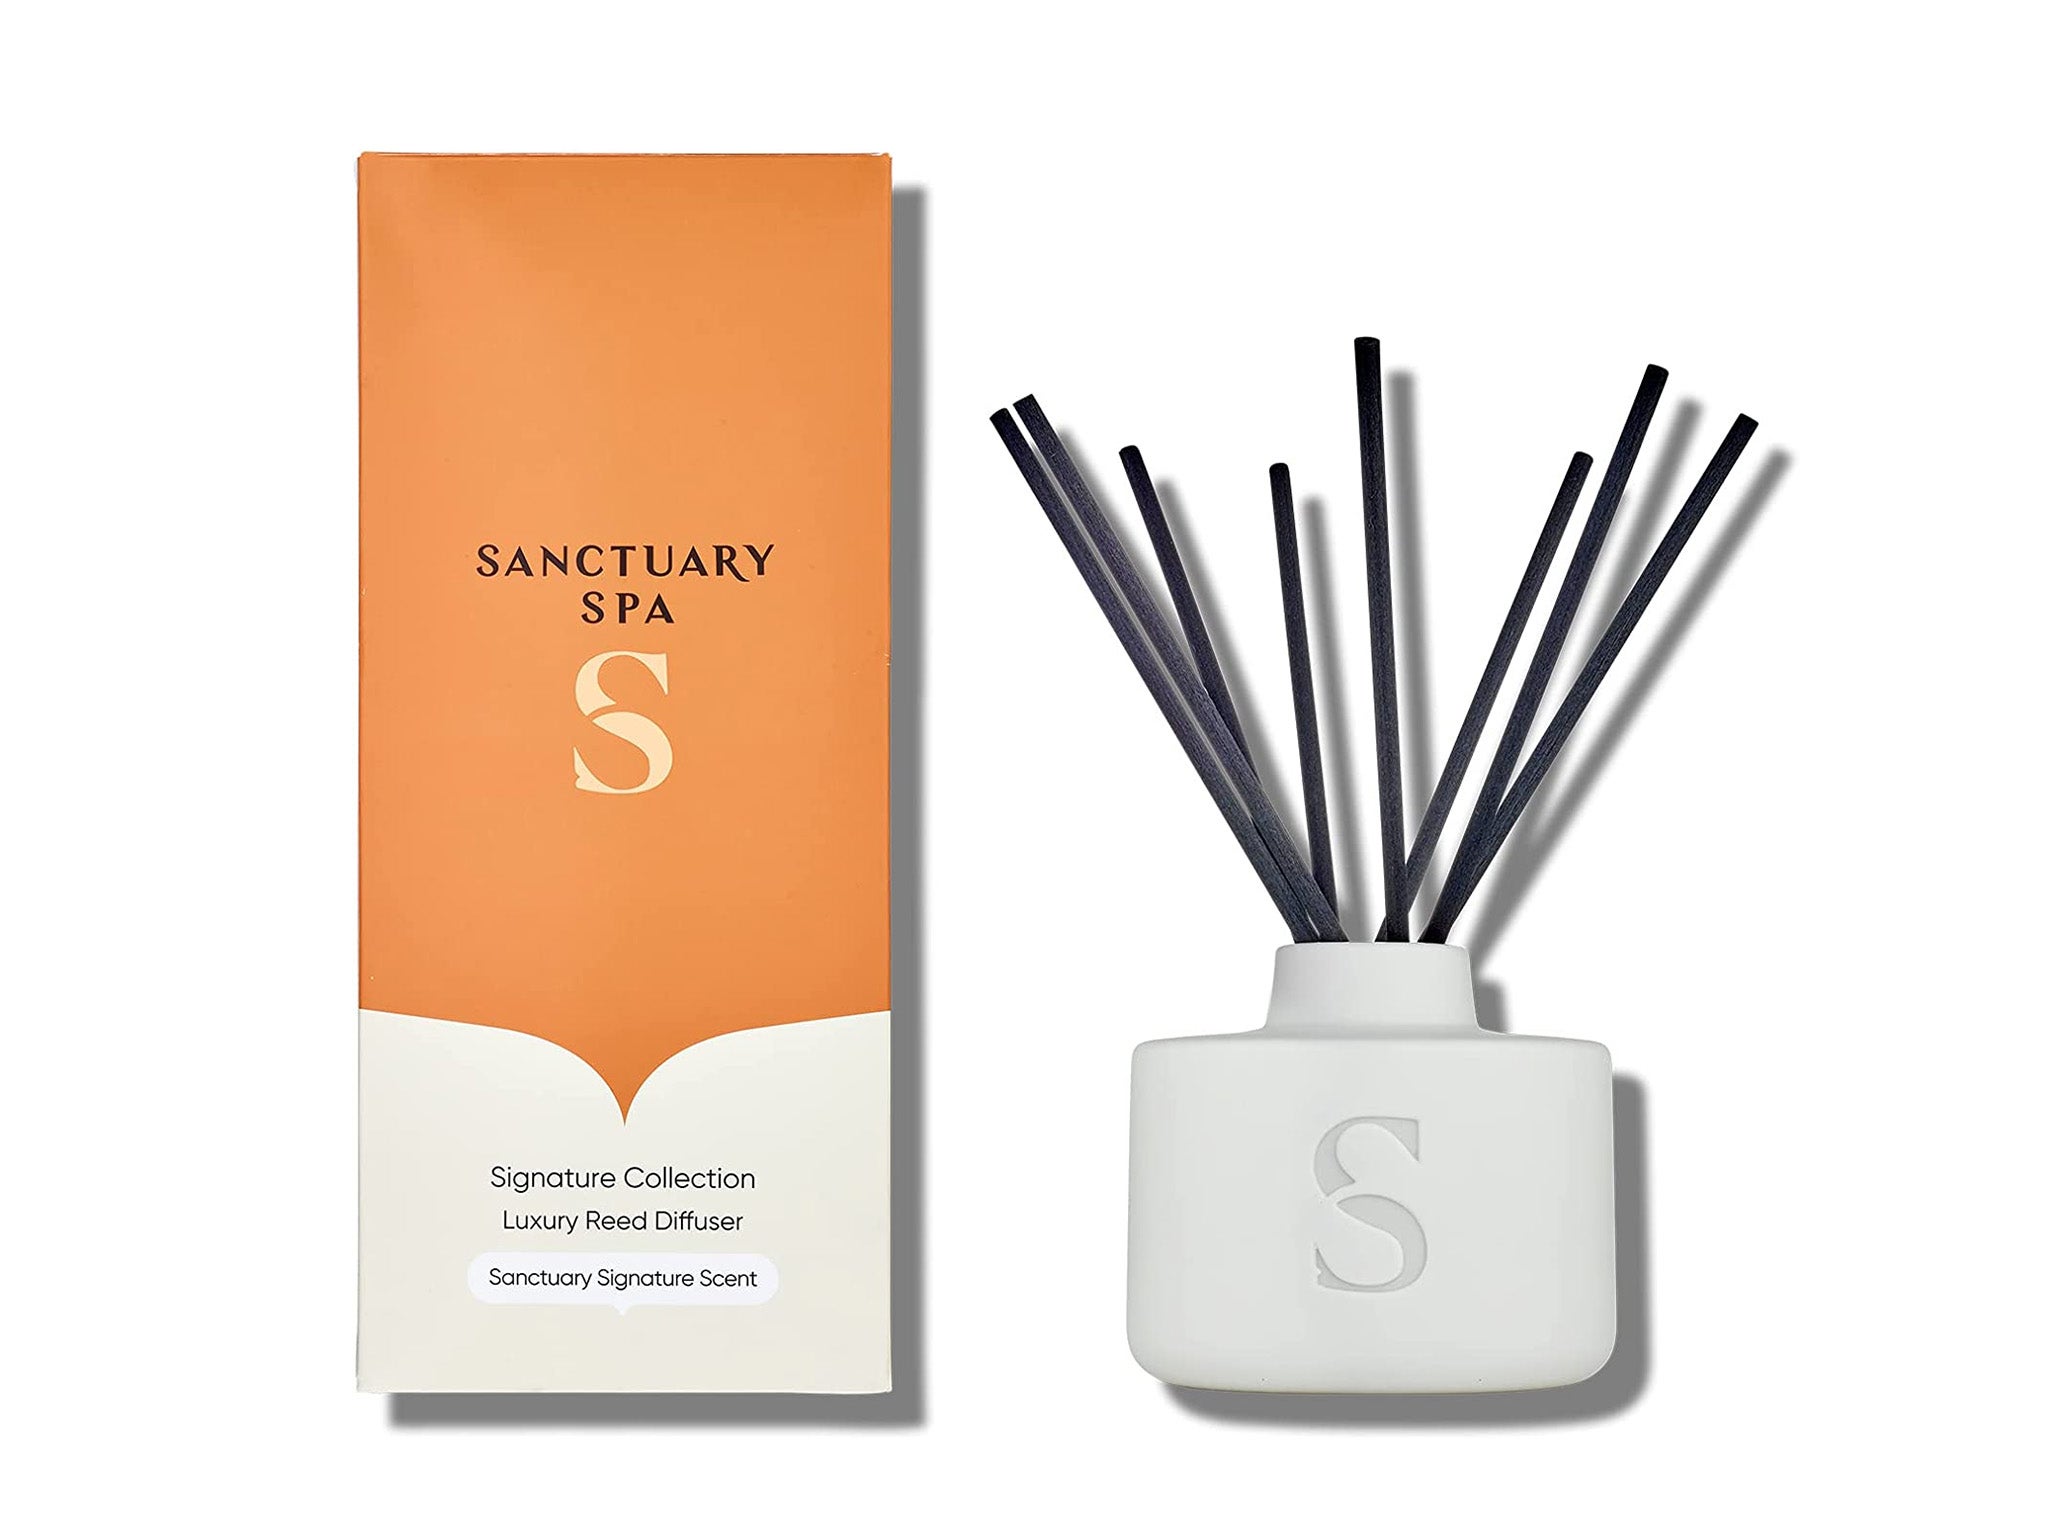 Sanctuary Spa signature collection luxury reed diffuser